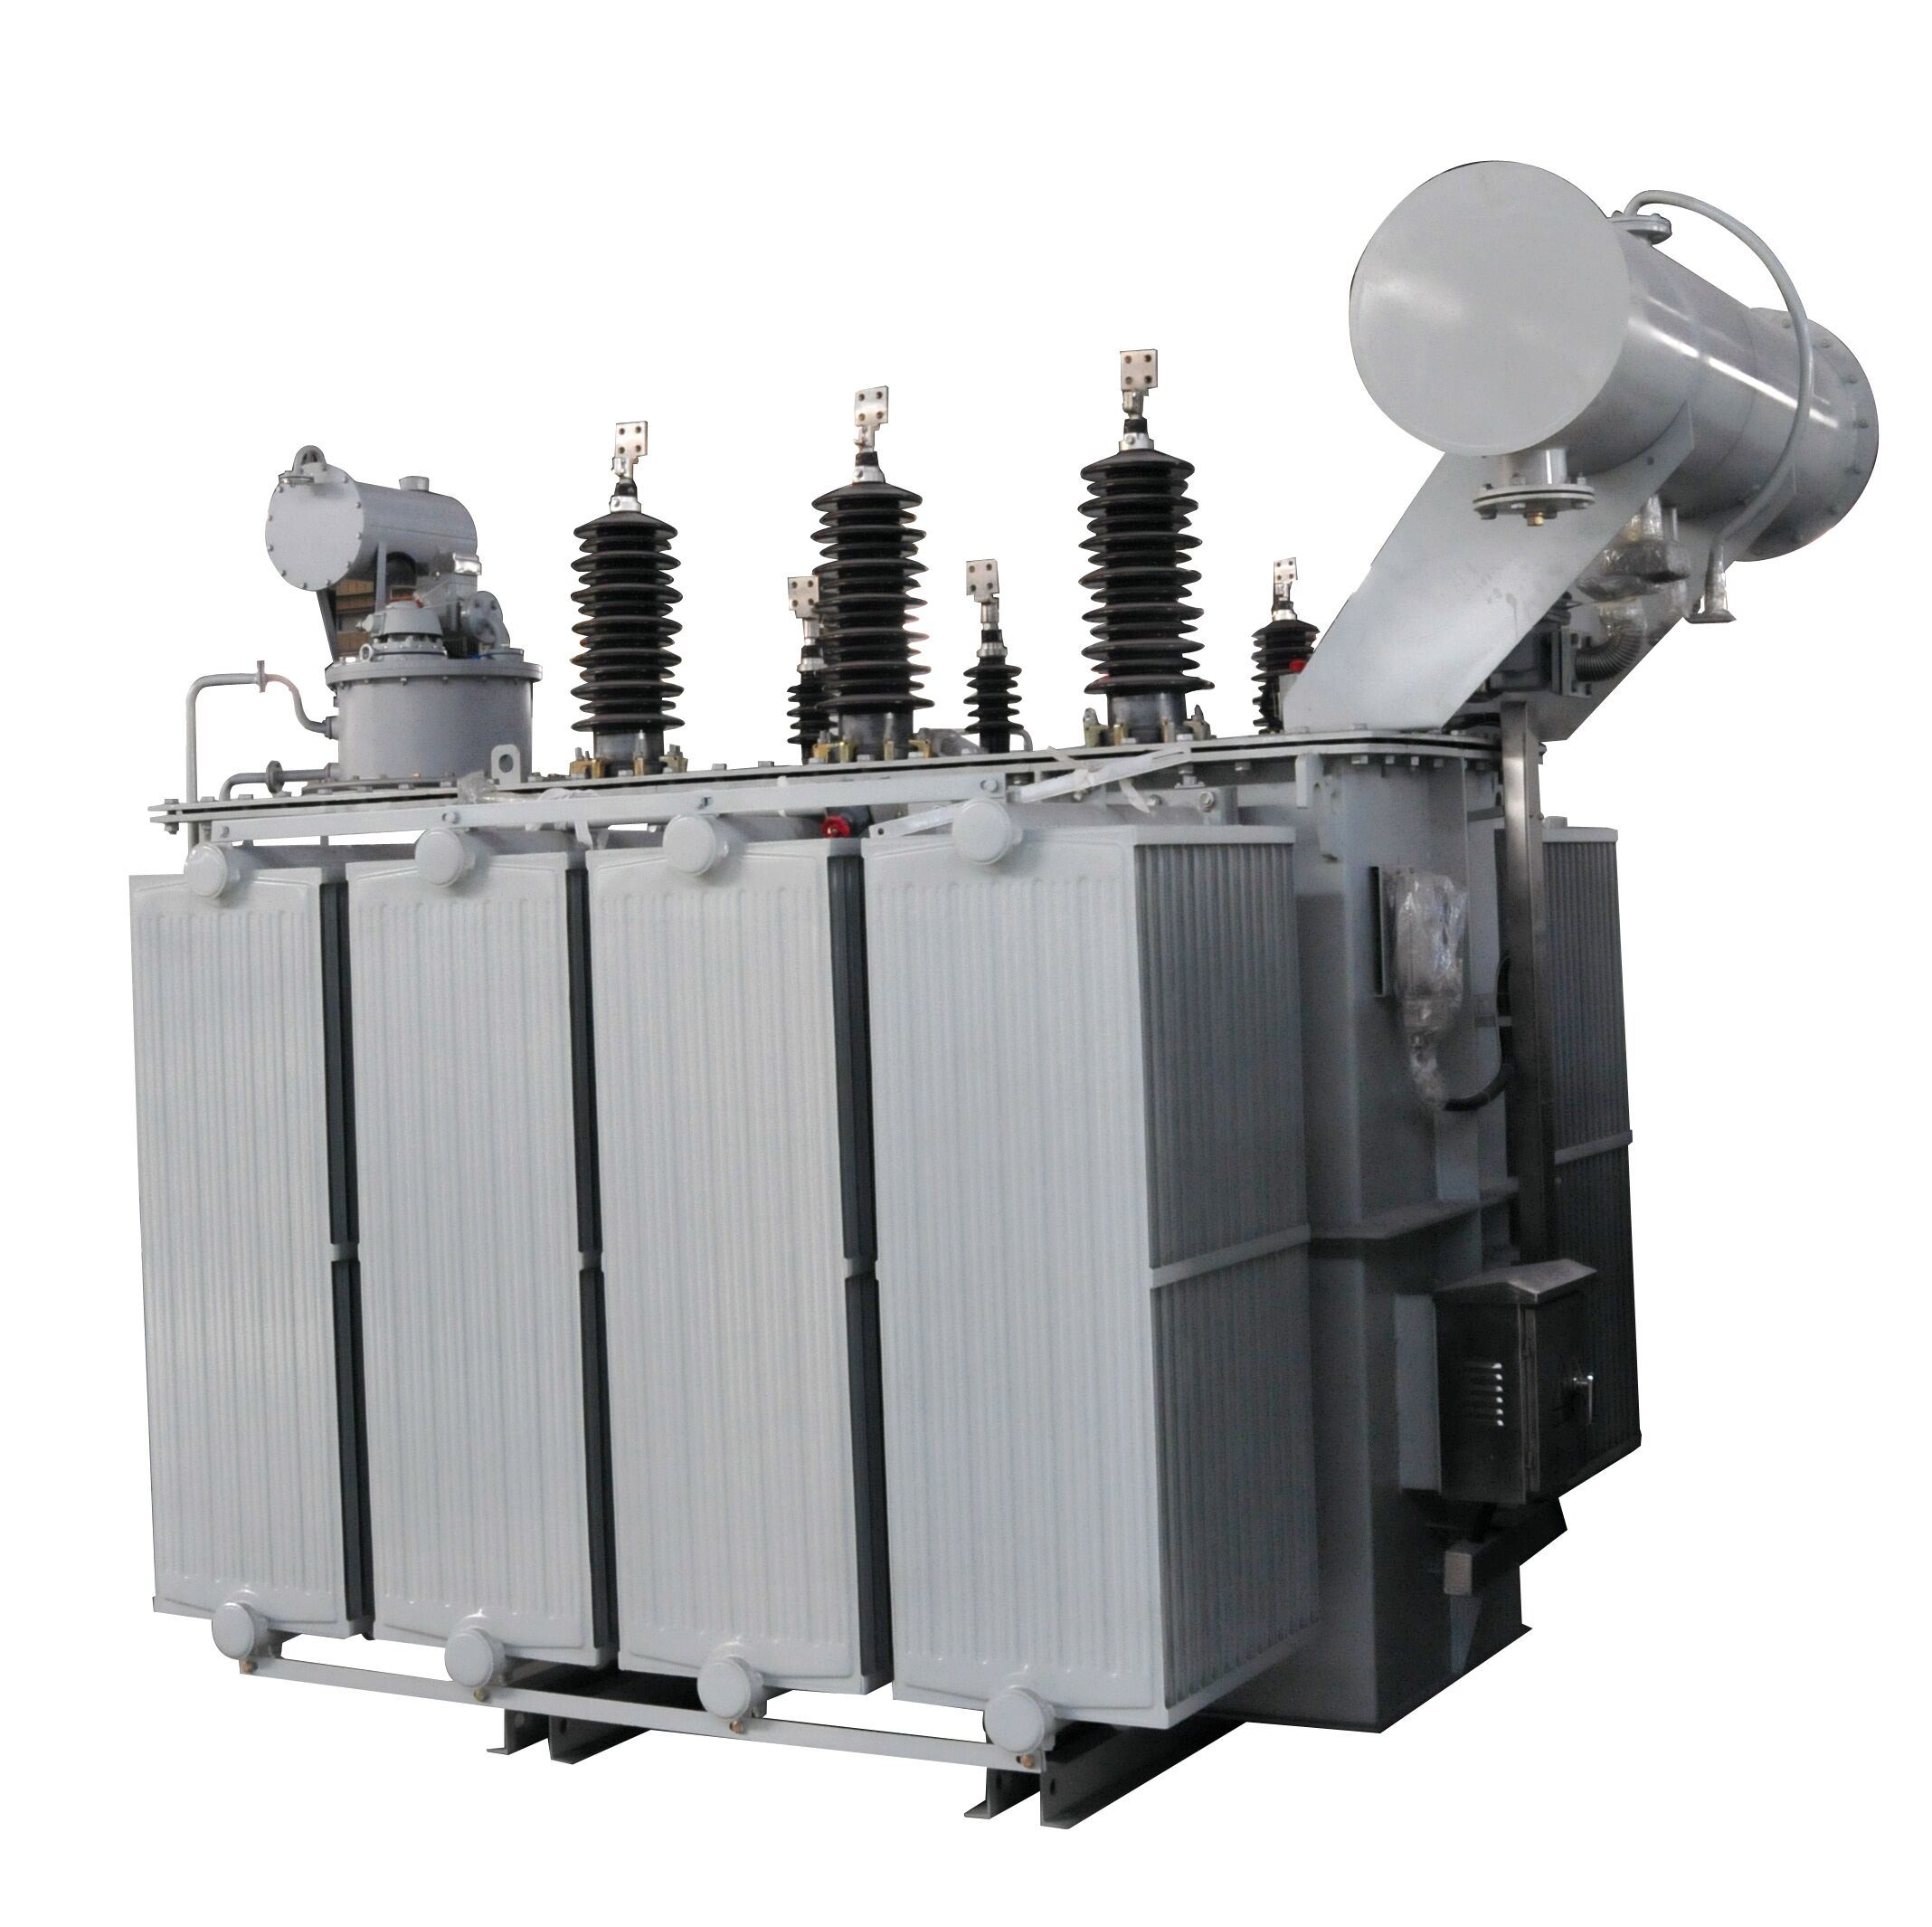 S11 Type of Oil-Immersed Power Transformer